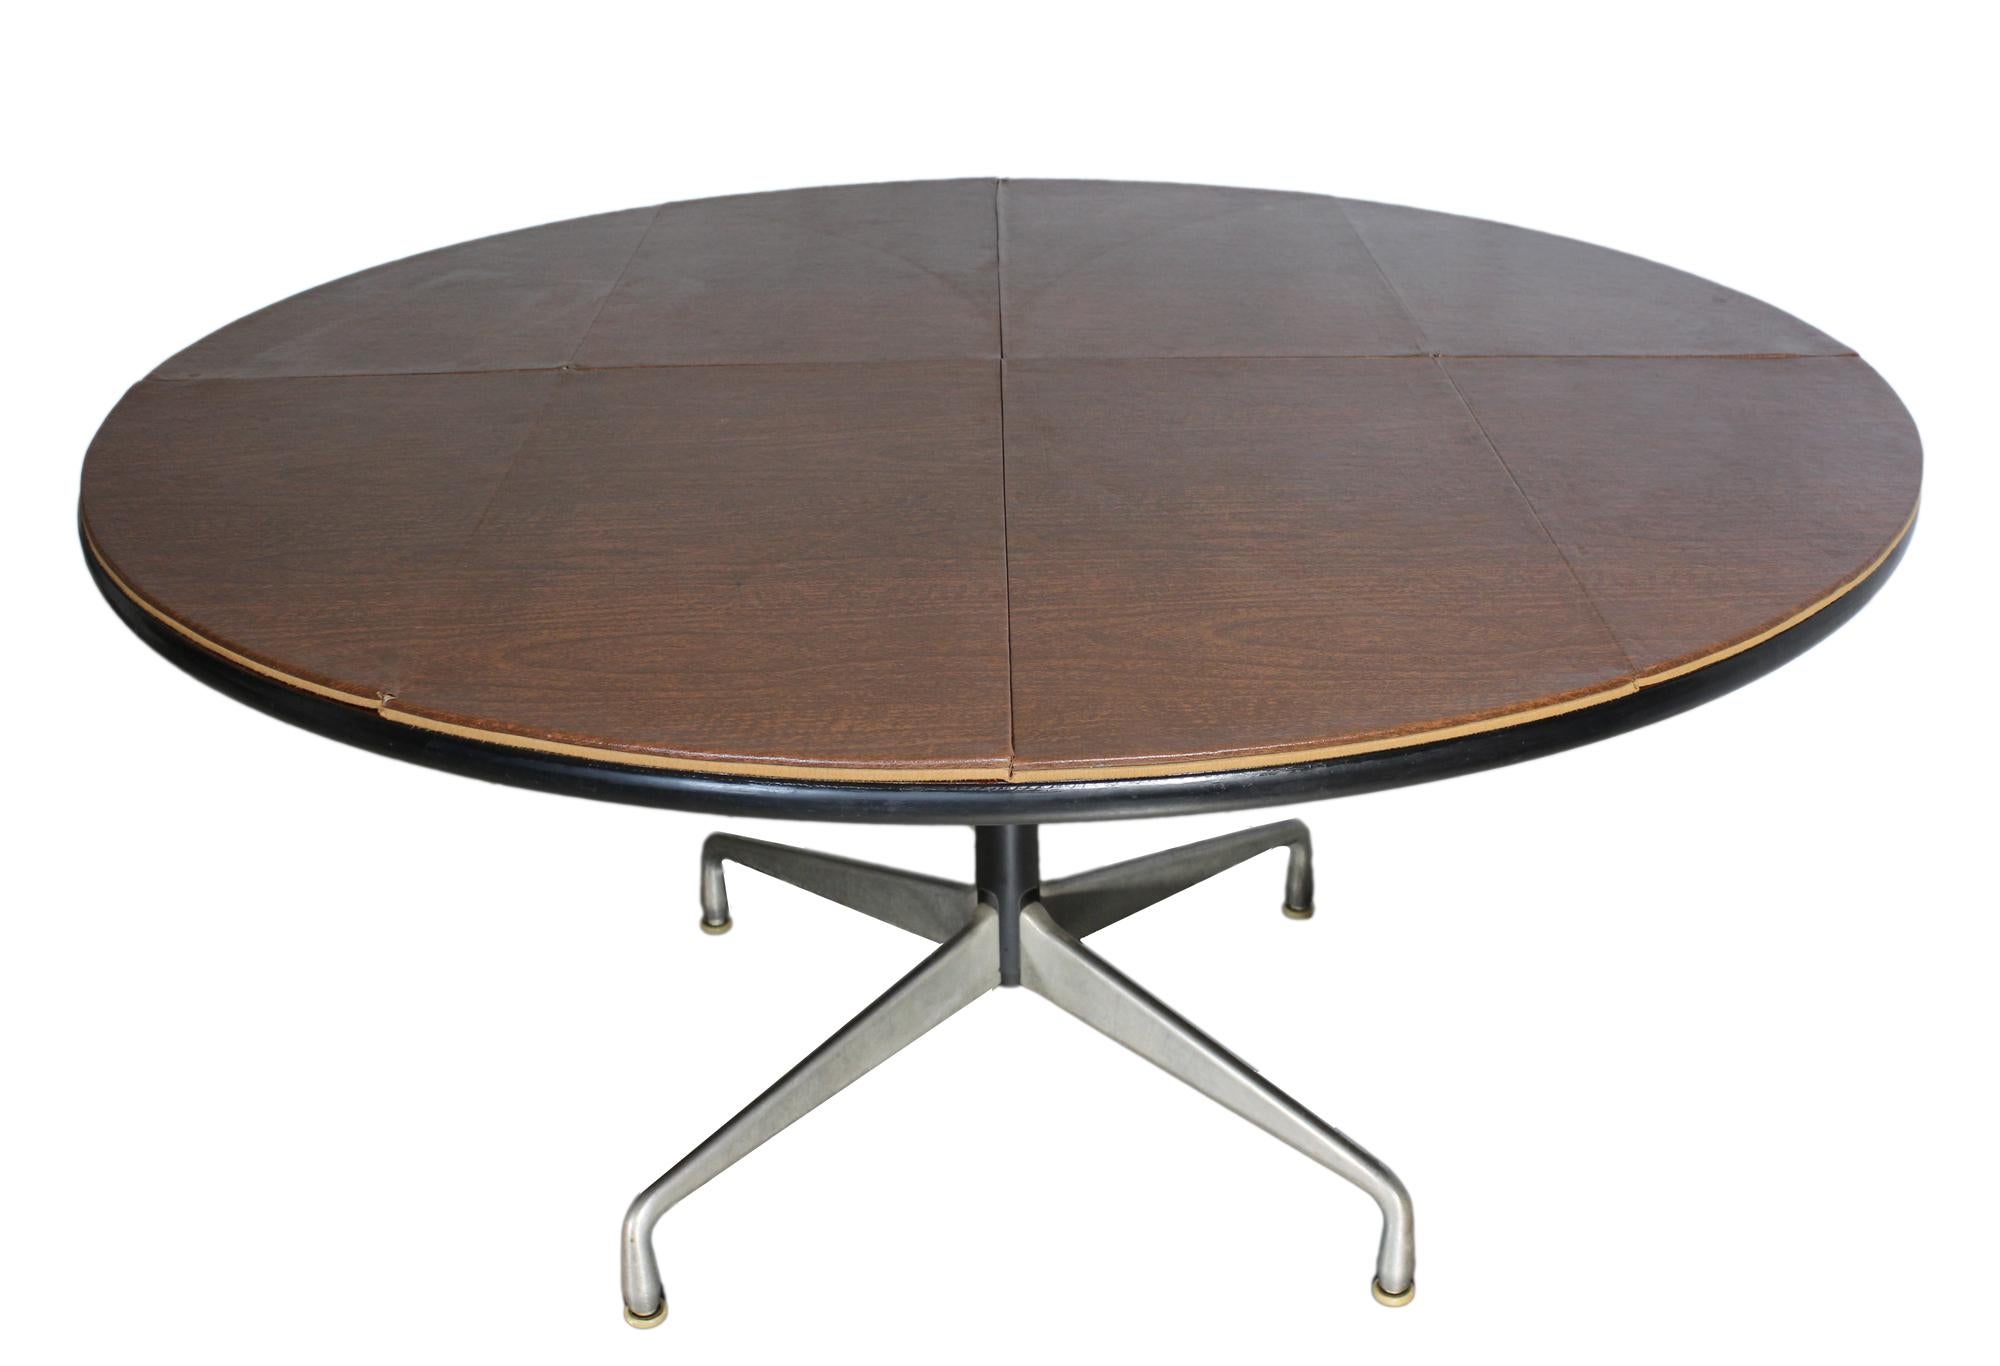 Veneer Eames Round Rosewood Table with Original Accessories